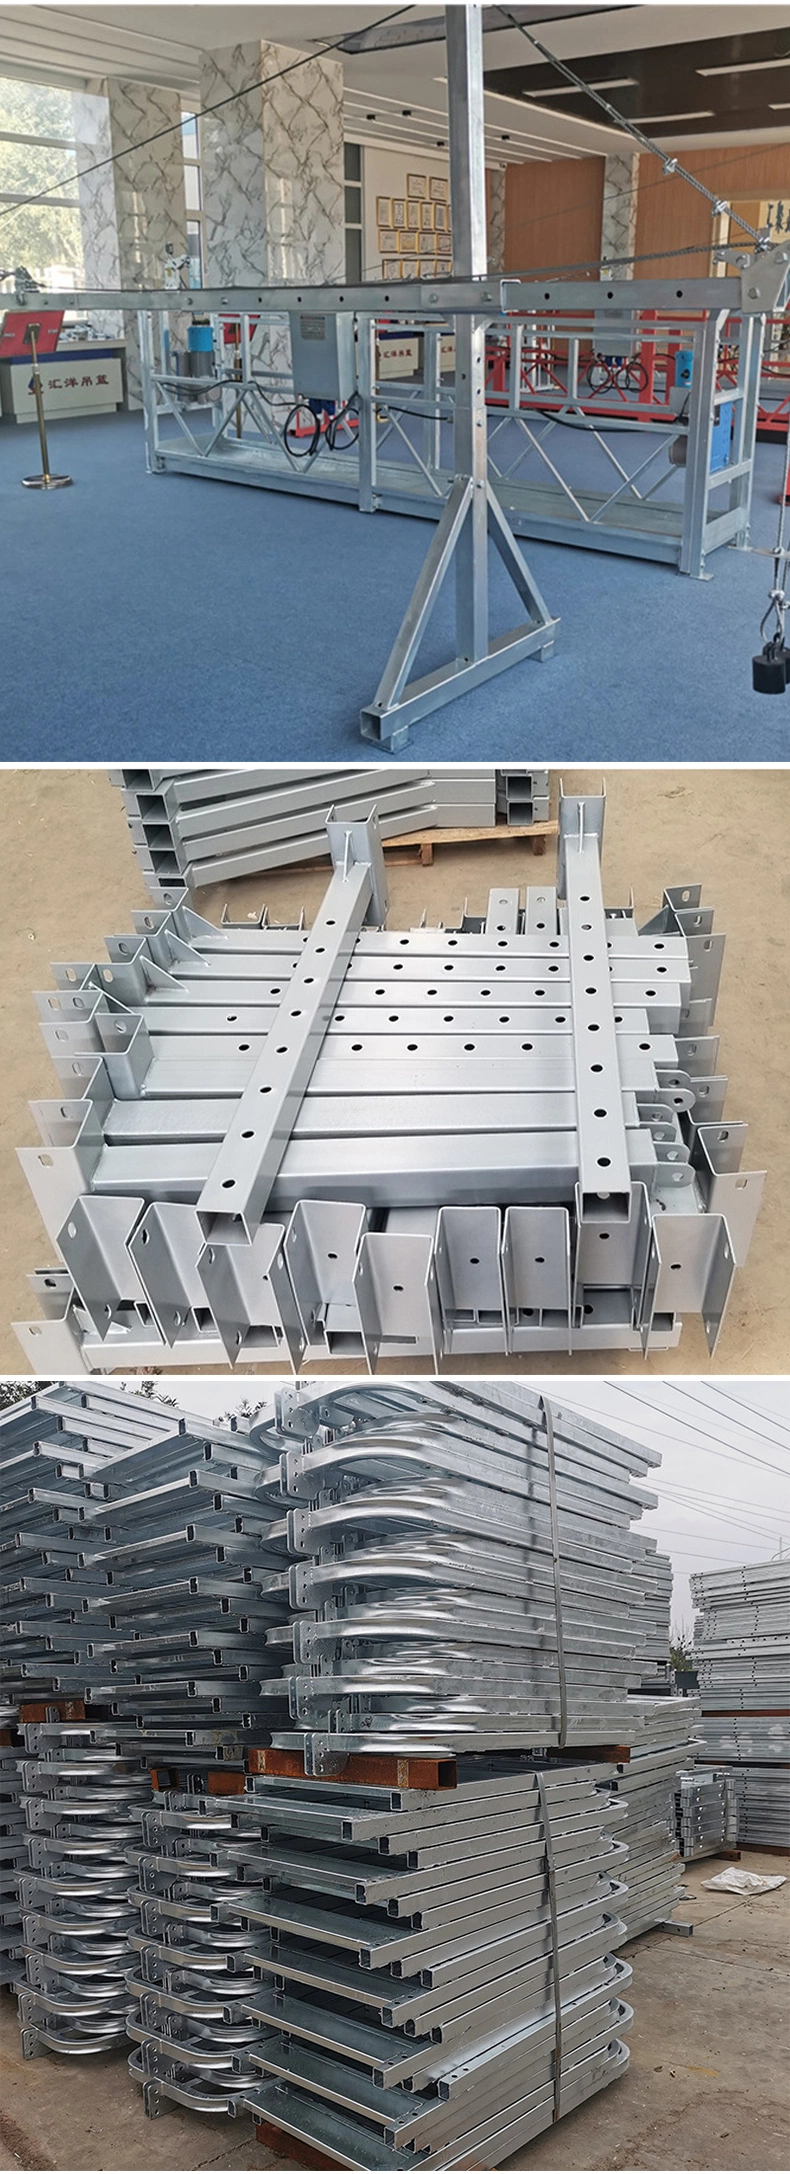 Zlp 630 High Quality Suspended Platform Lift Scaffolding